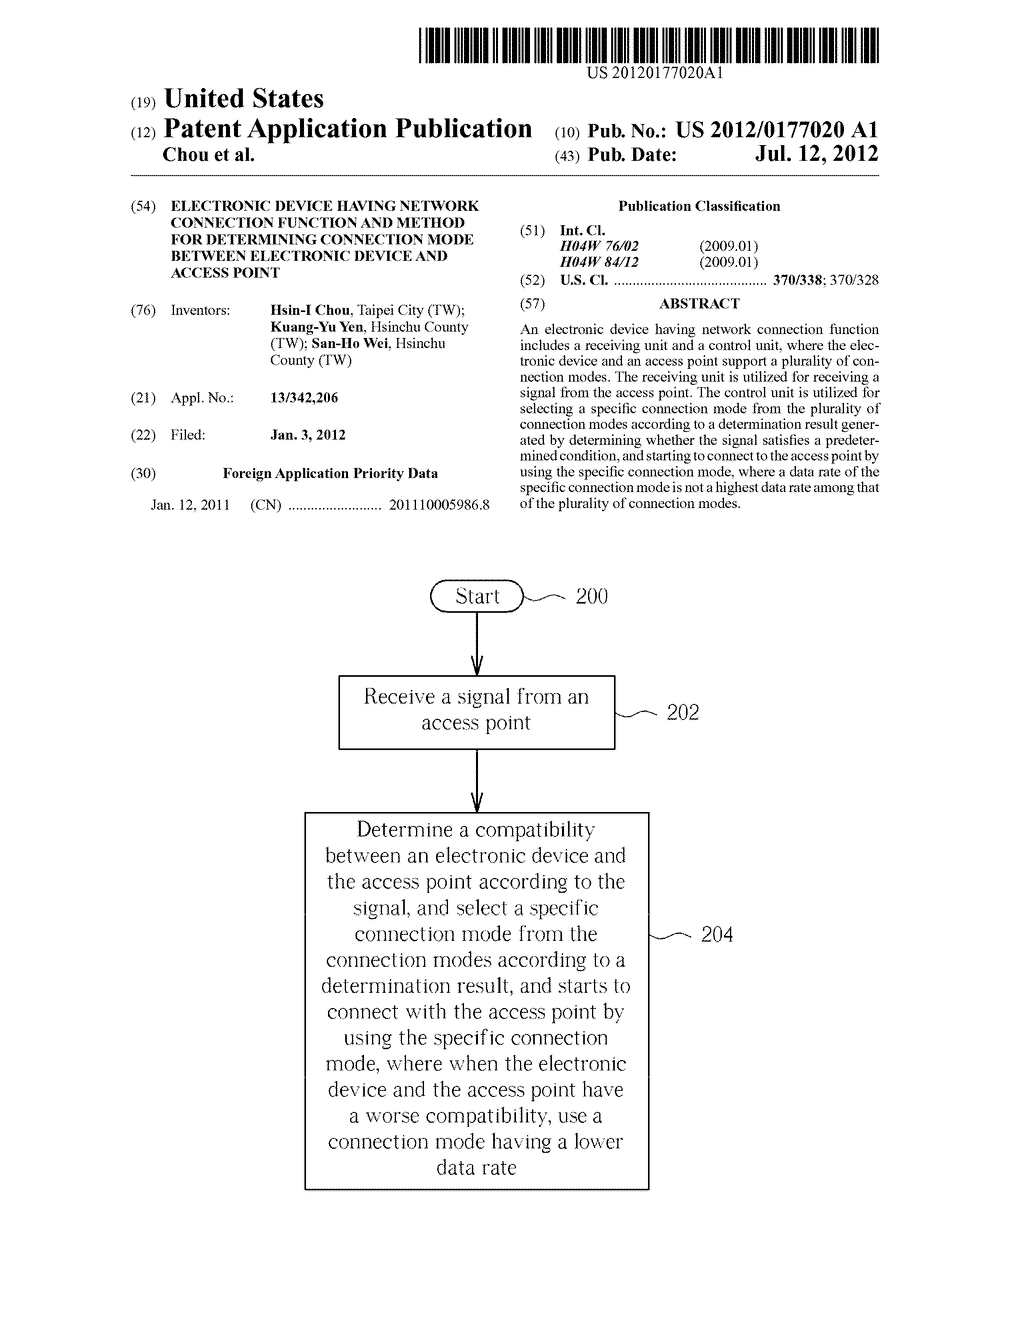 ELECTRONIC DEVICE HAVING NETWORK CONNECTION FUNCTION AND METHOD FOR     DETERMINING CONNECTION MODE BETWEEN ELECTRONIC DEVICE AND ACCESS POINT - diagram, schematic, and image 01